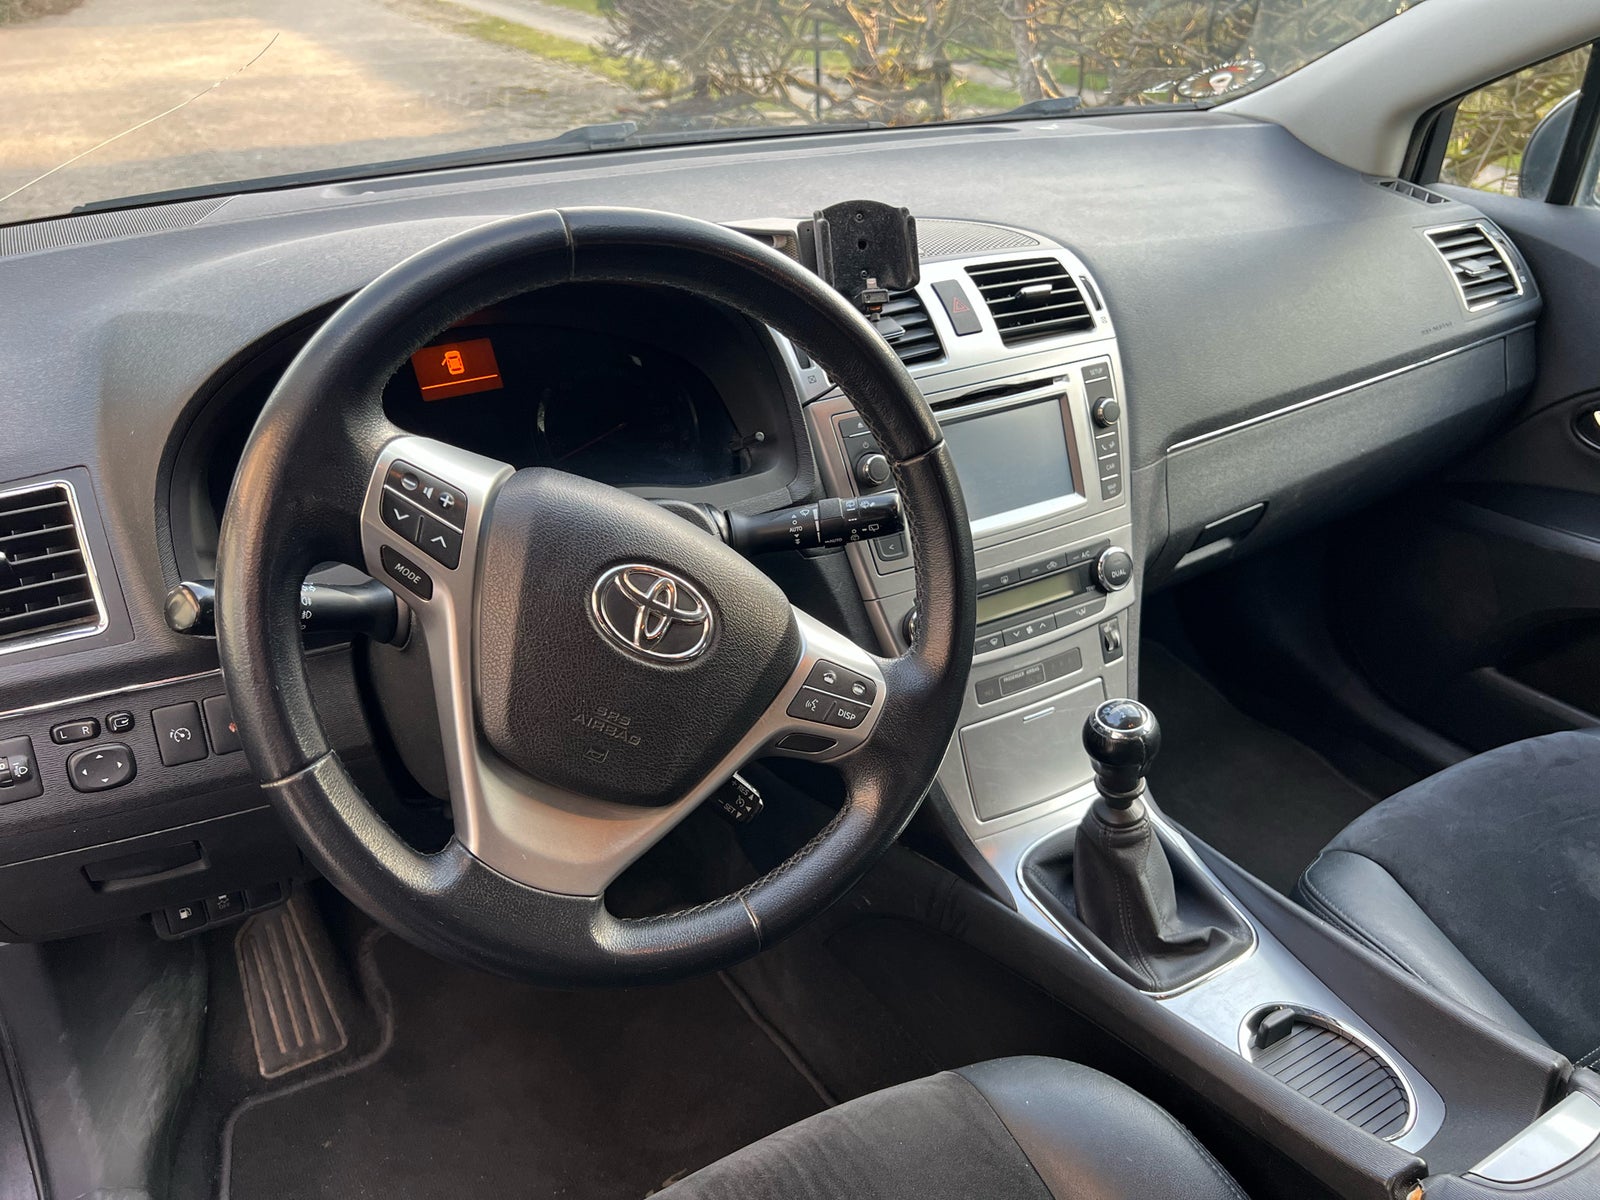 Toyota Avensis, 2,0 D-4D T2 Touch stc., Diesel